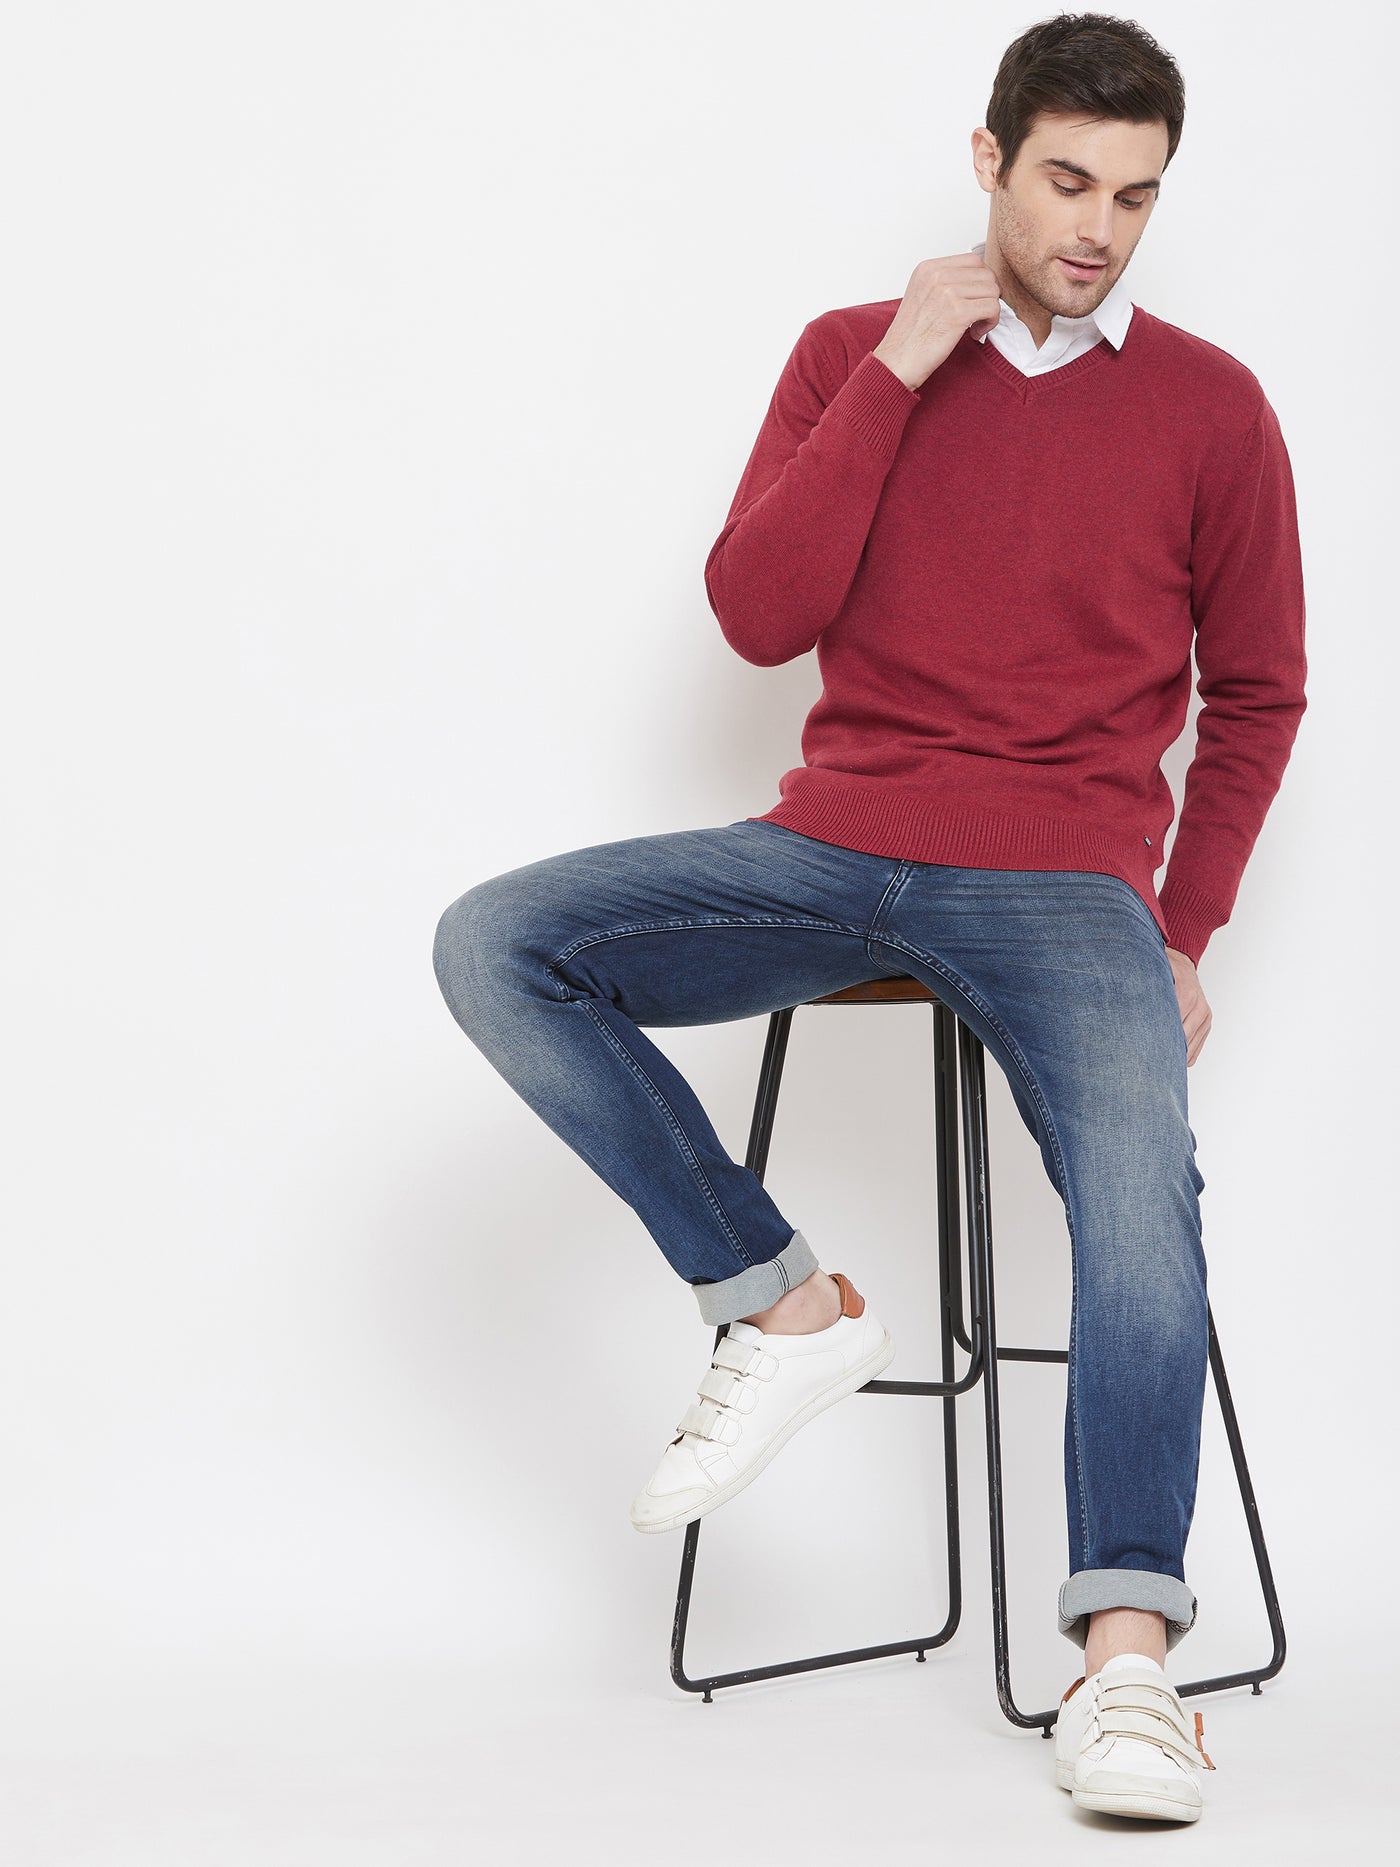 Red V-Neck Sweater - Men Sweaters